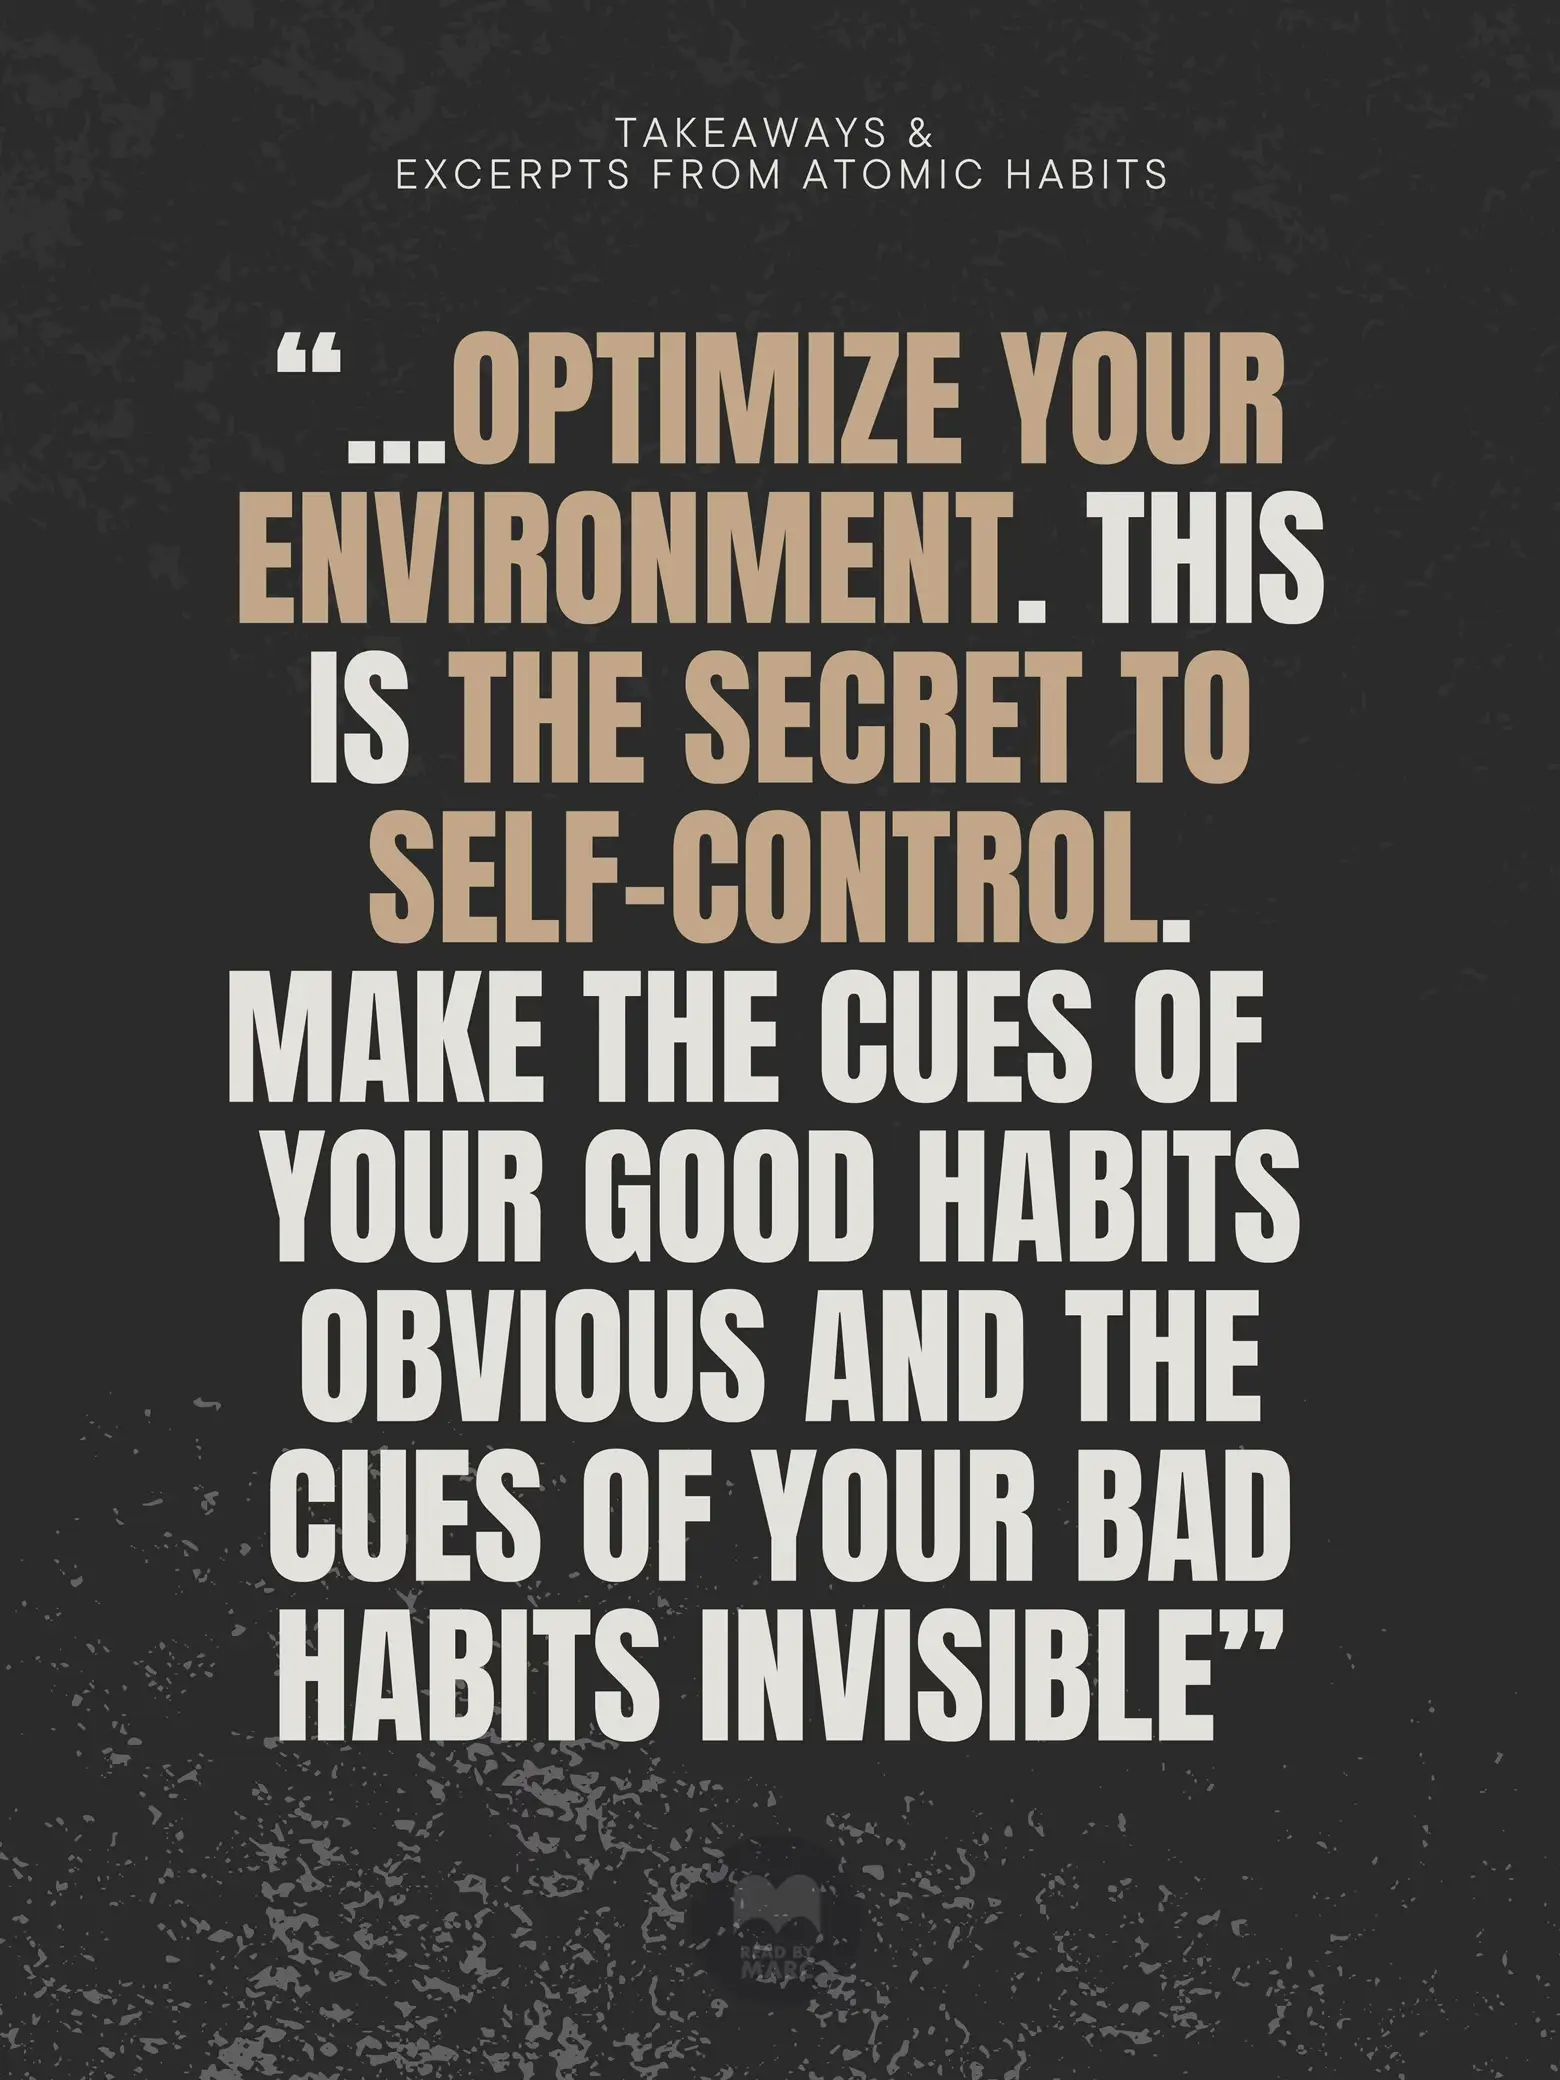 Atomic Habits Summary, favourite quotes and my key takeaways from